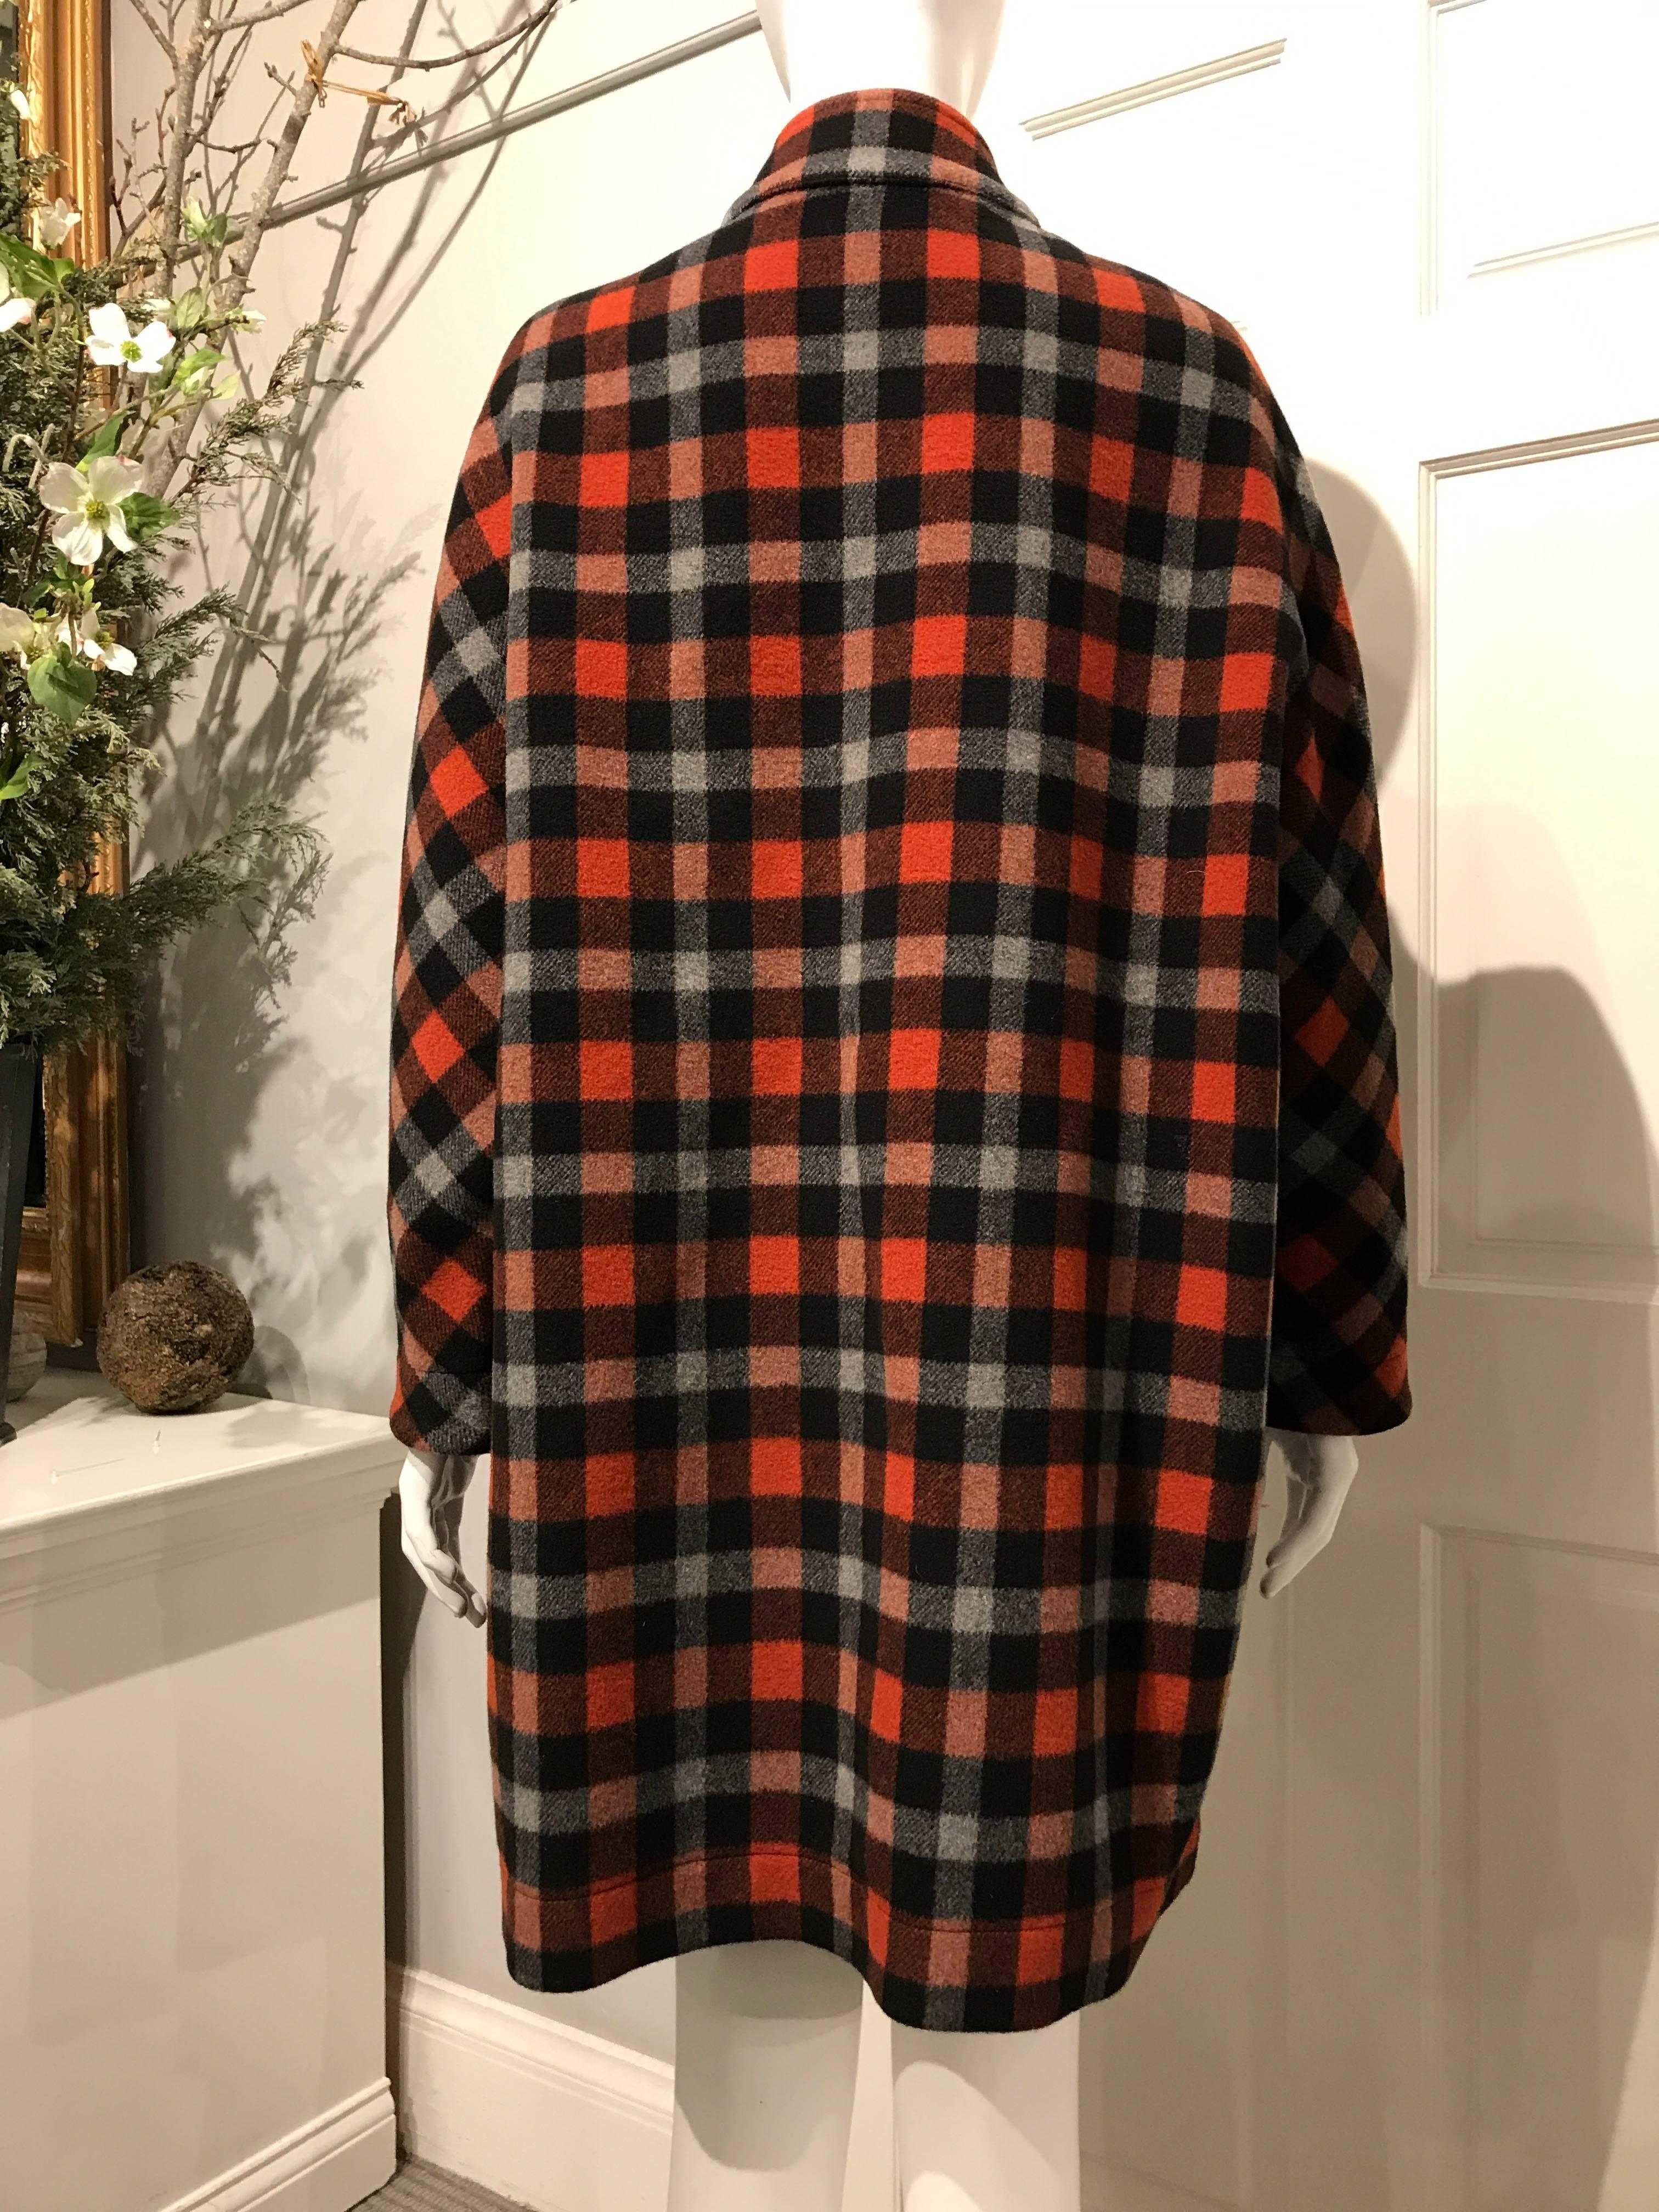 Balenciaga coat in a rust-red, black and grey checkered double sided wool fabric dark brown on the inside. The coat closes with pewter colored snaps. It has two big top pockets with flaps on the front and a small breast pocked on the inside in